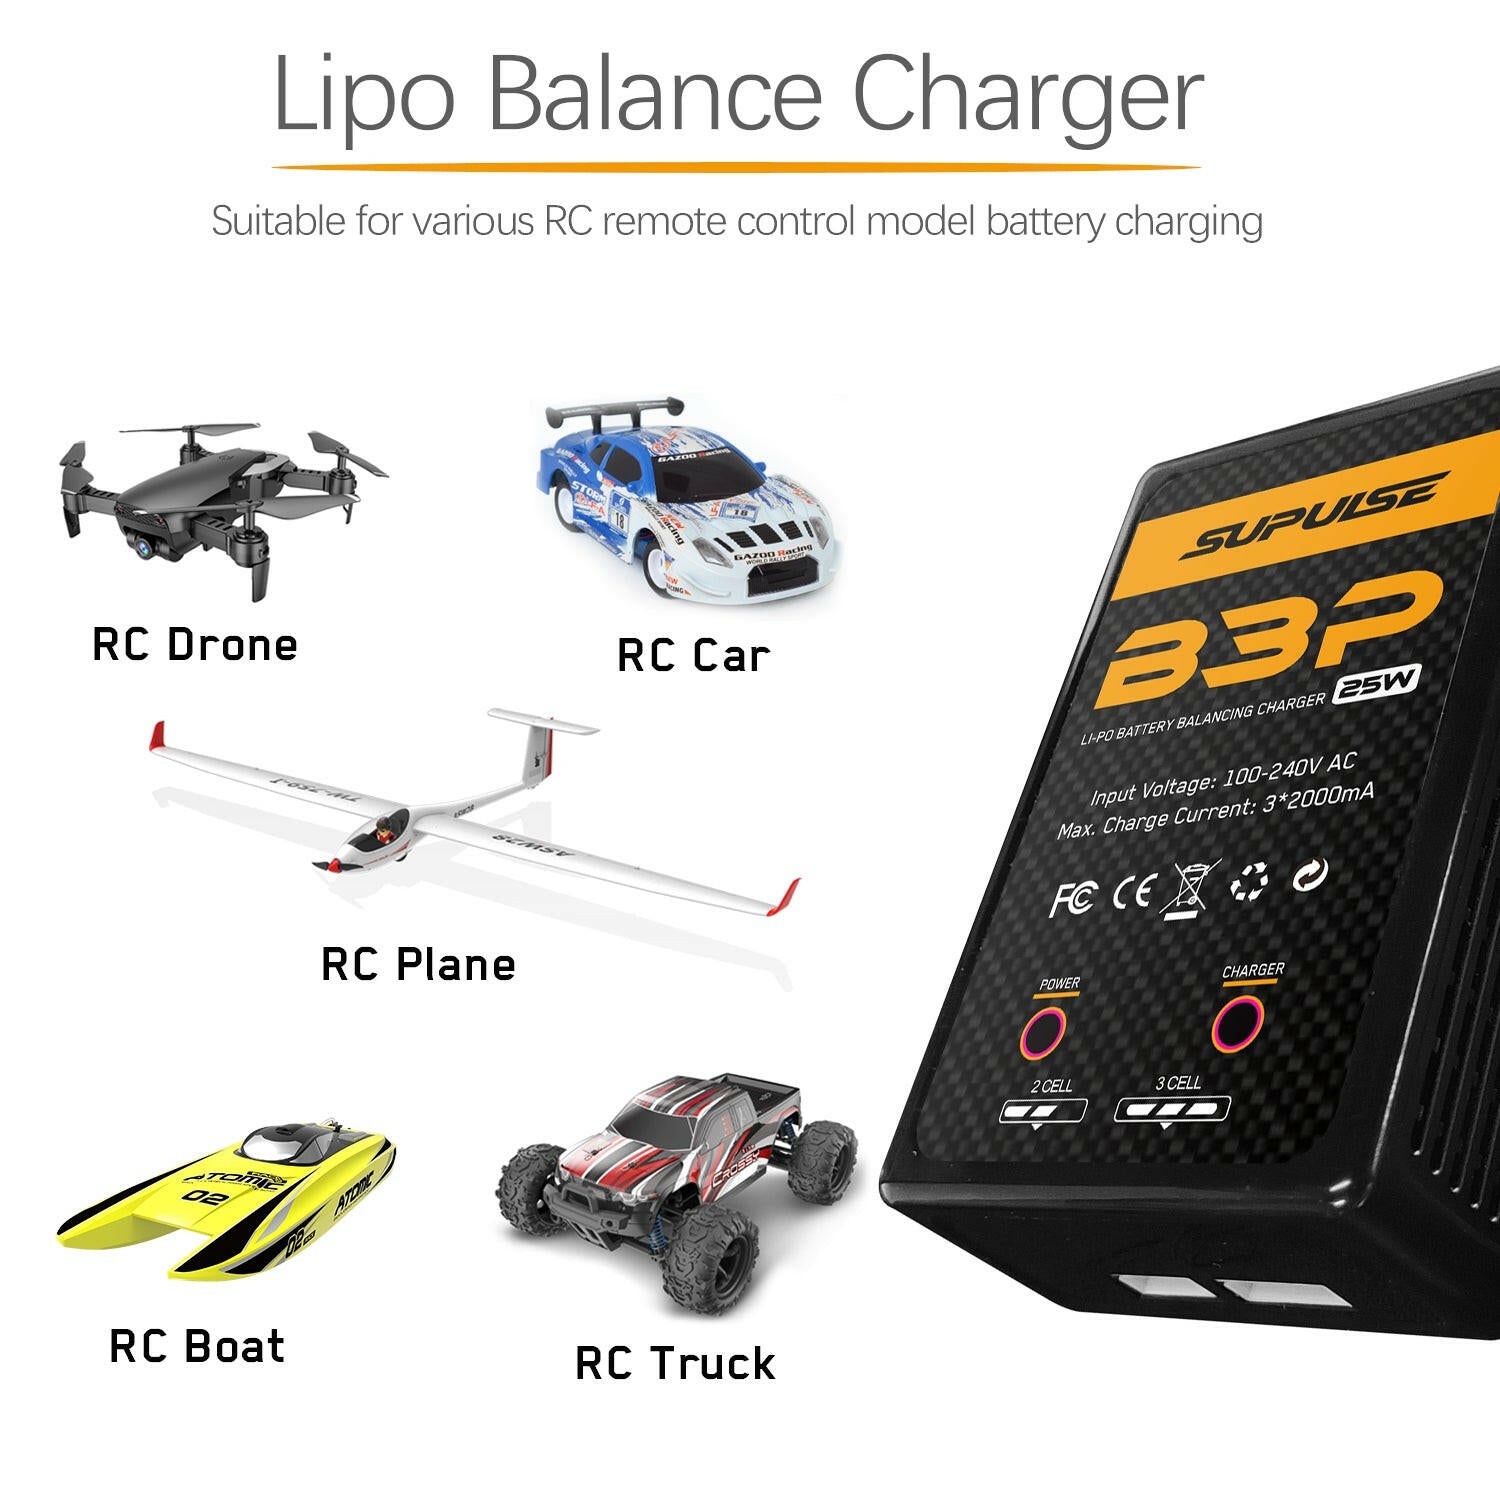 SUPULSE B3P Pro AC LiPo Battery Charger 2S-3S 25W RC Balance Charger - EXHOBBY